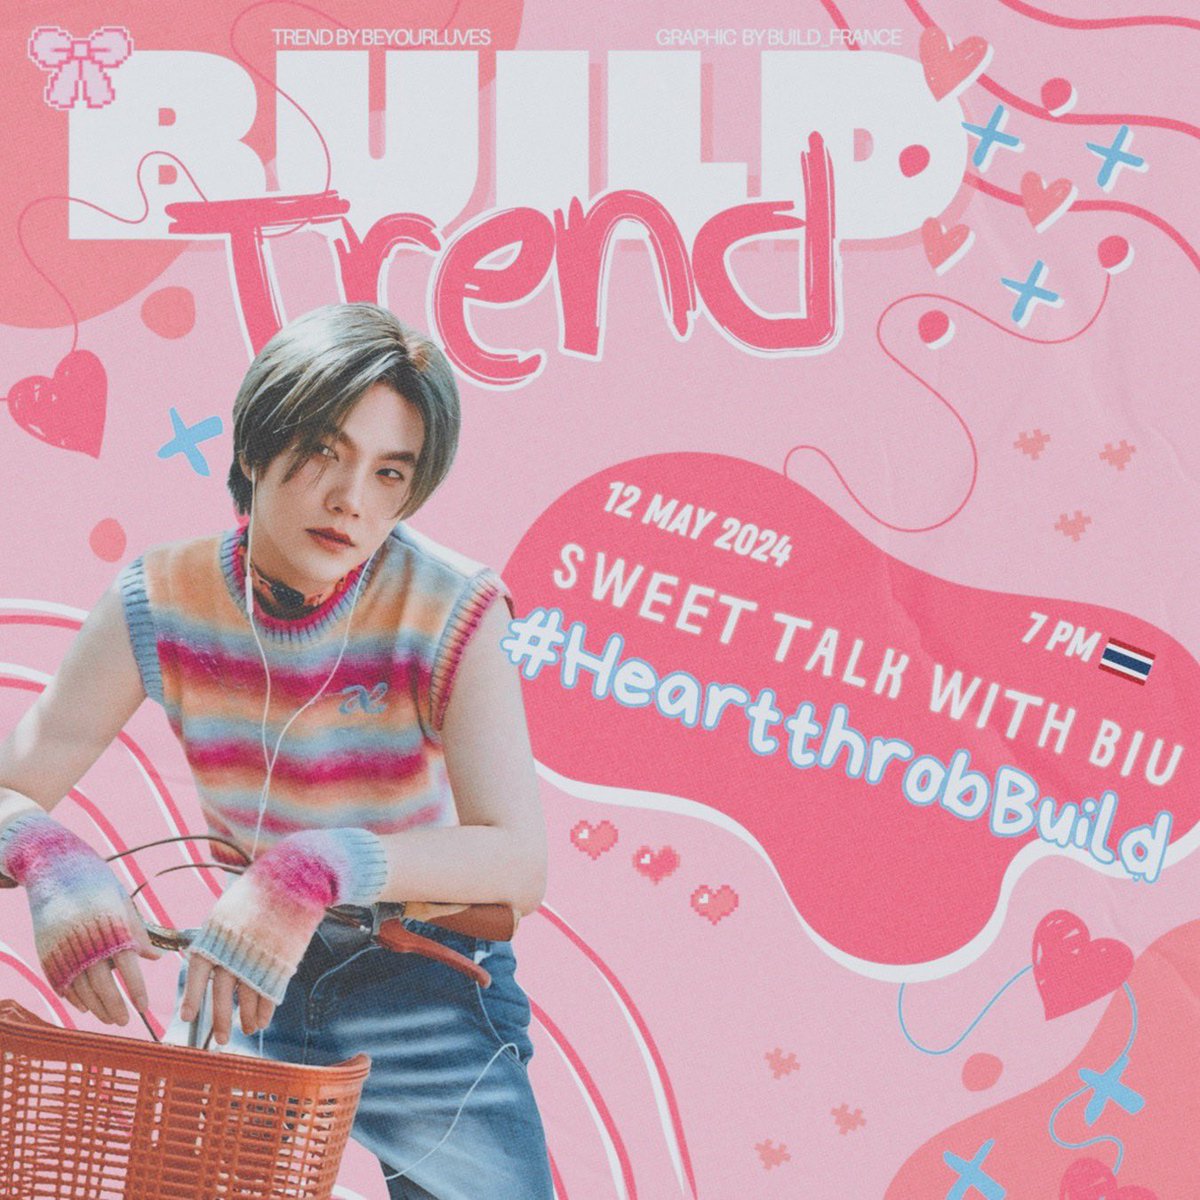 📢 BUILD TREND SCHEDULE Get ready to unleash your best pickup lines and heartfelt declarations because the Flirt with Biu trend returns this Sunday! 💕🥰💙 🗓️ May 12th 2024 🔑 SWEET TALK WITH BIU #️⃣ HeartthrobBuild ⏰ 7 PM 🇹🇭 , 5.30 PM 🇮🇳 Trend: Beyourluves Graphic:…